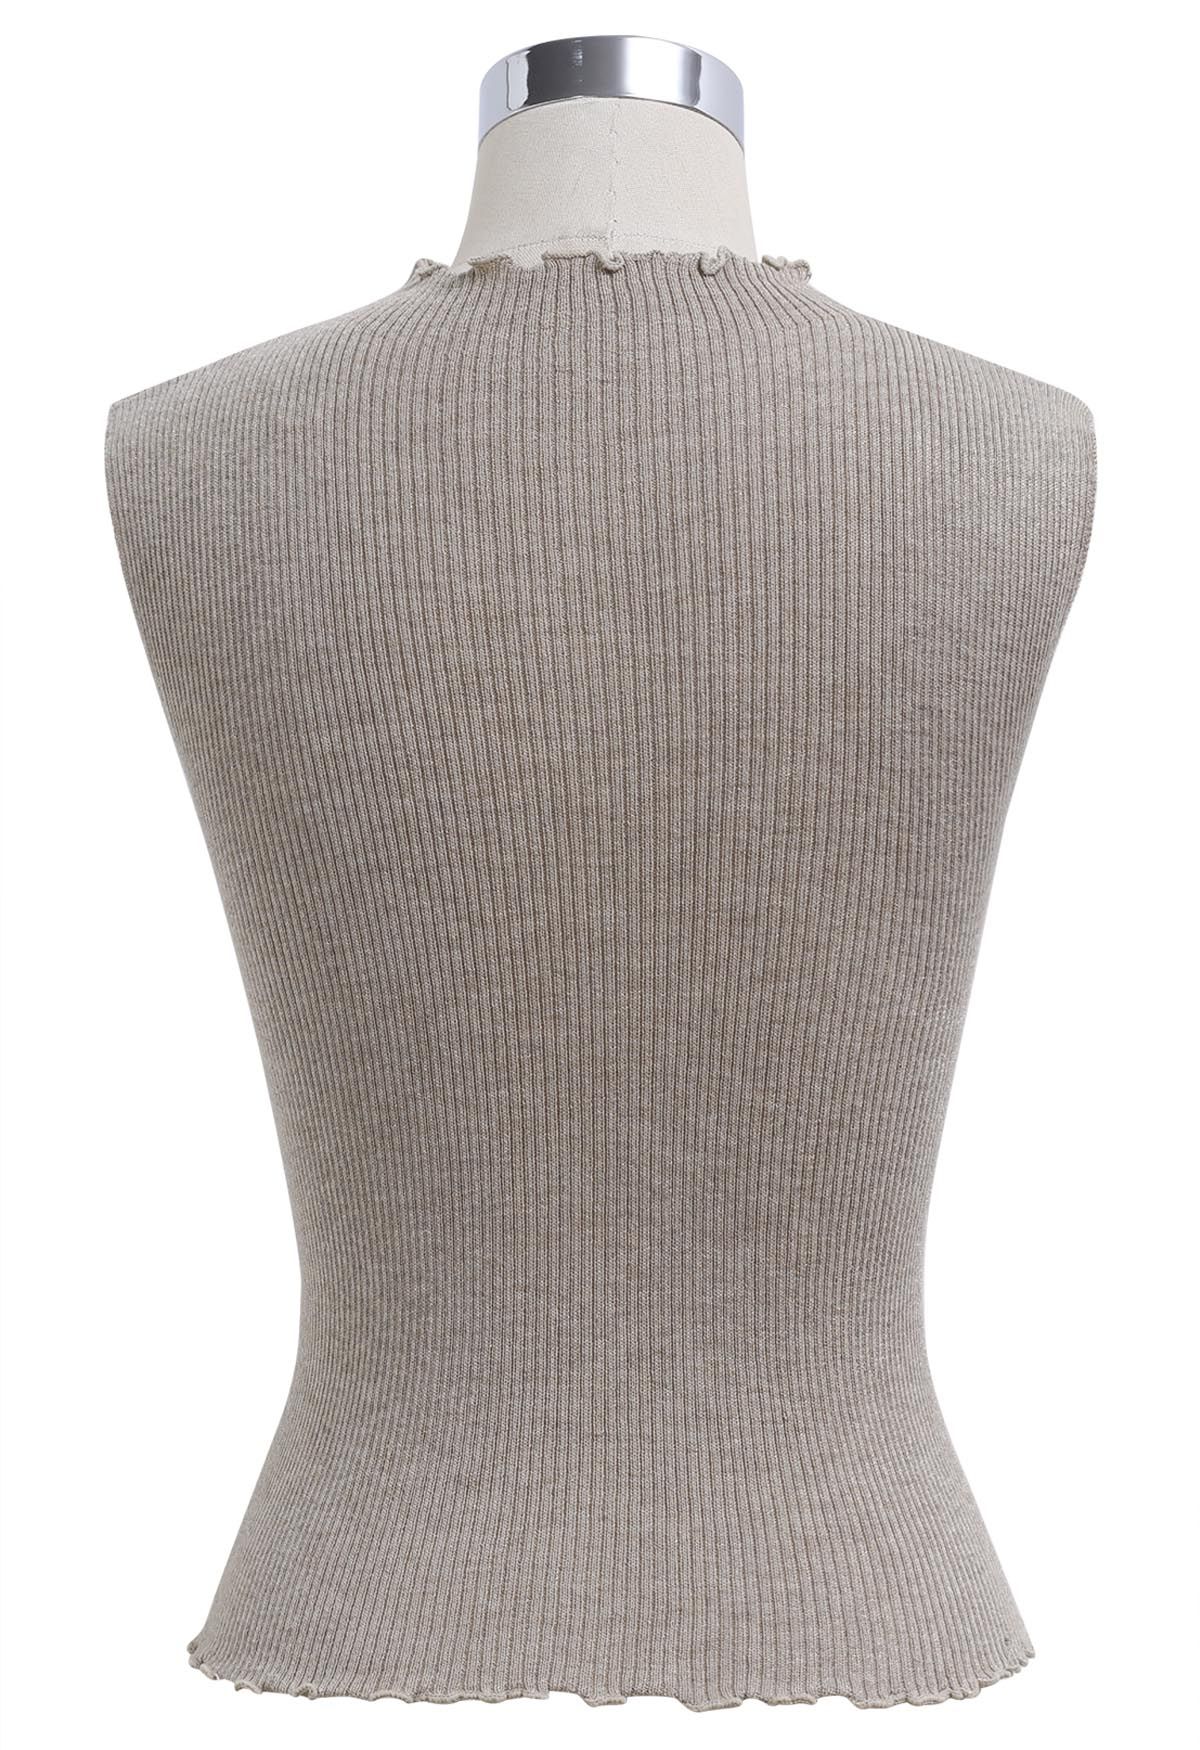 Glittery Lettuce Edge Sleeveless Knit Top in Taupe